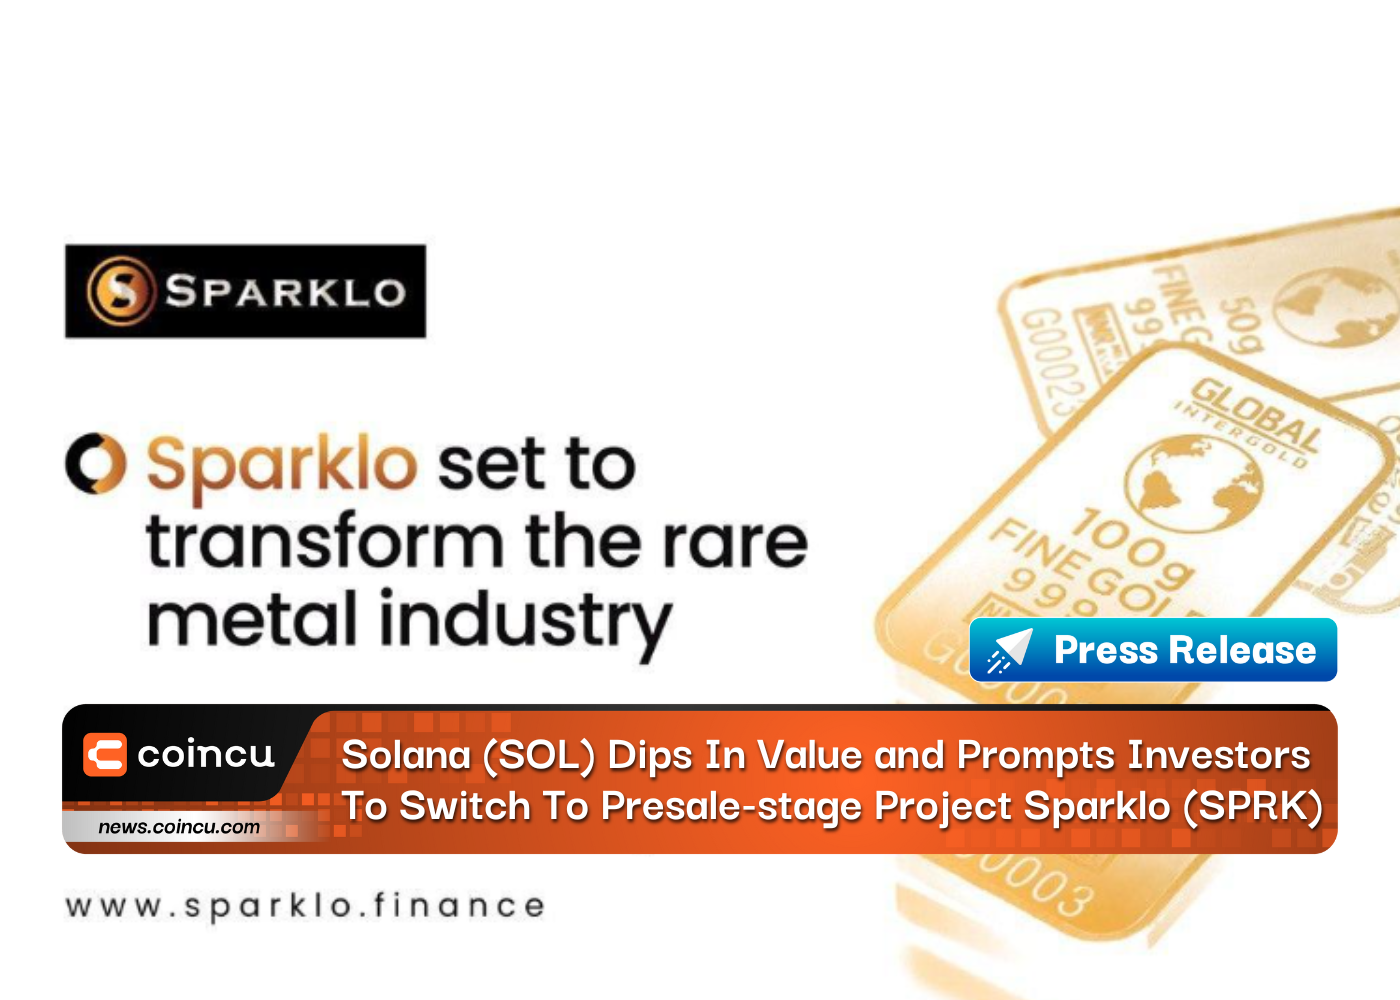 Solana (SOL) Dips In Value And Prompts Investors To Switch To Presale-stage Project Sparklo (SPRK)